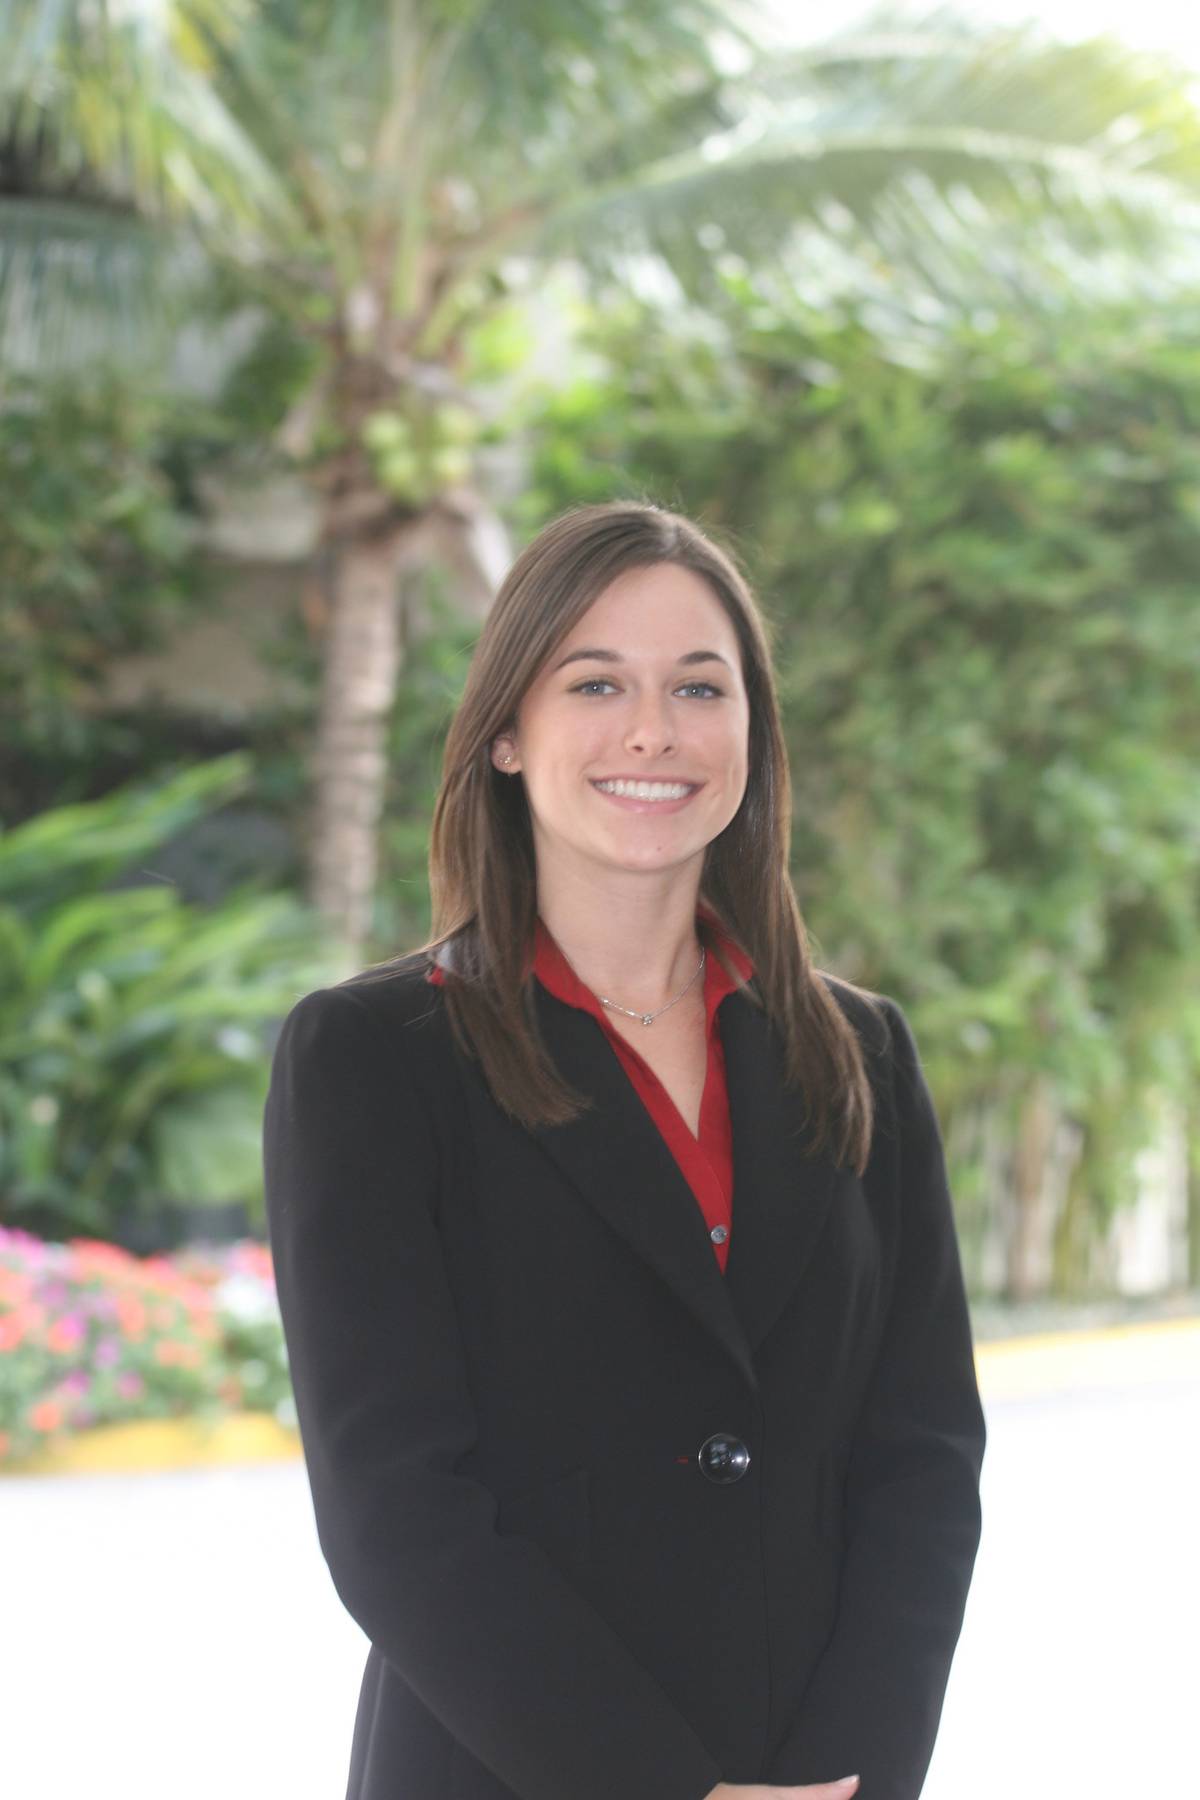 Rachel Barzilay is on the team of advisors at Merrill Lynch Pierce Fenner & Smith Incorporated in Boca Raton, FL.